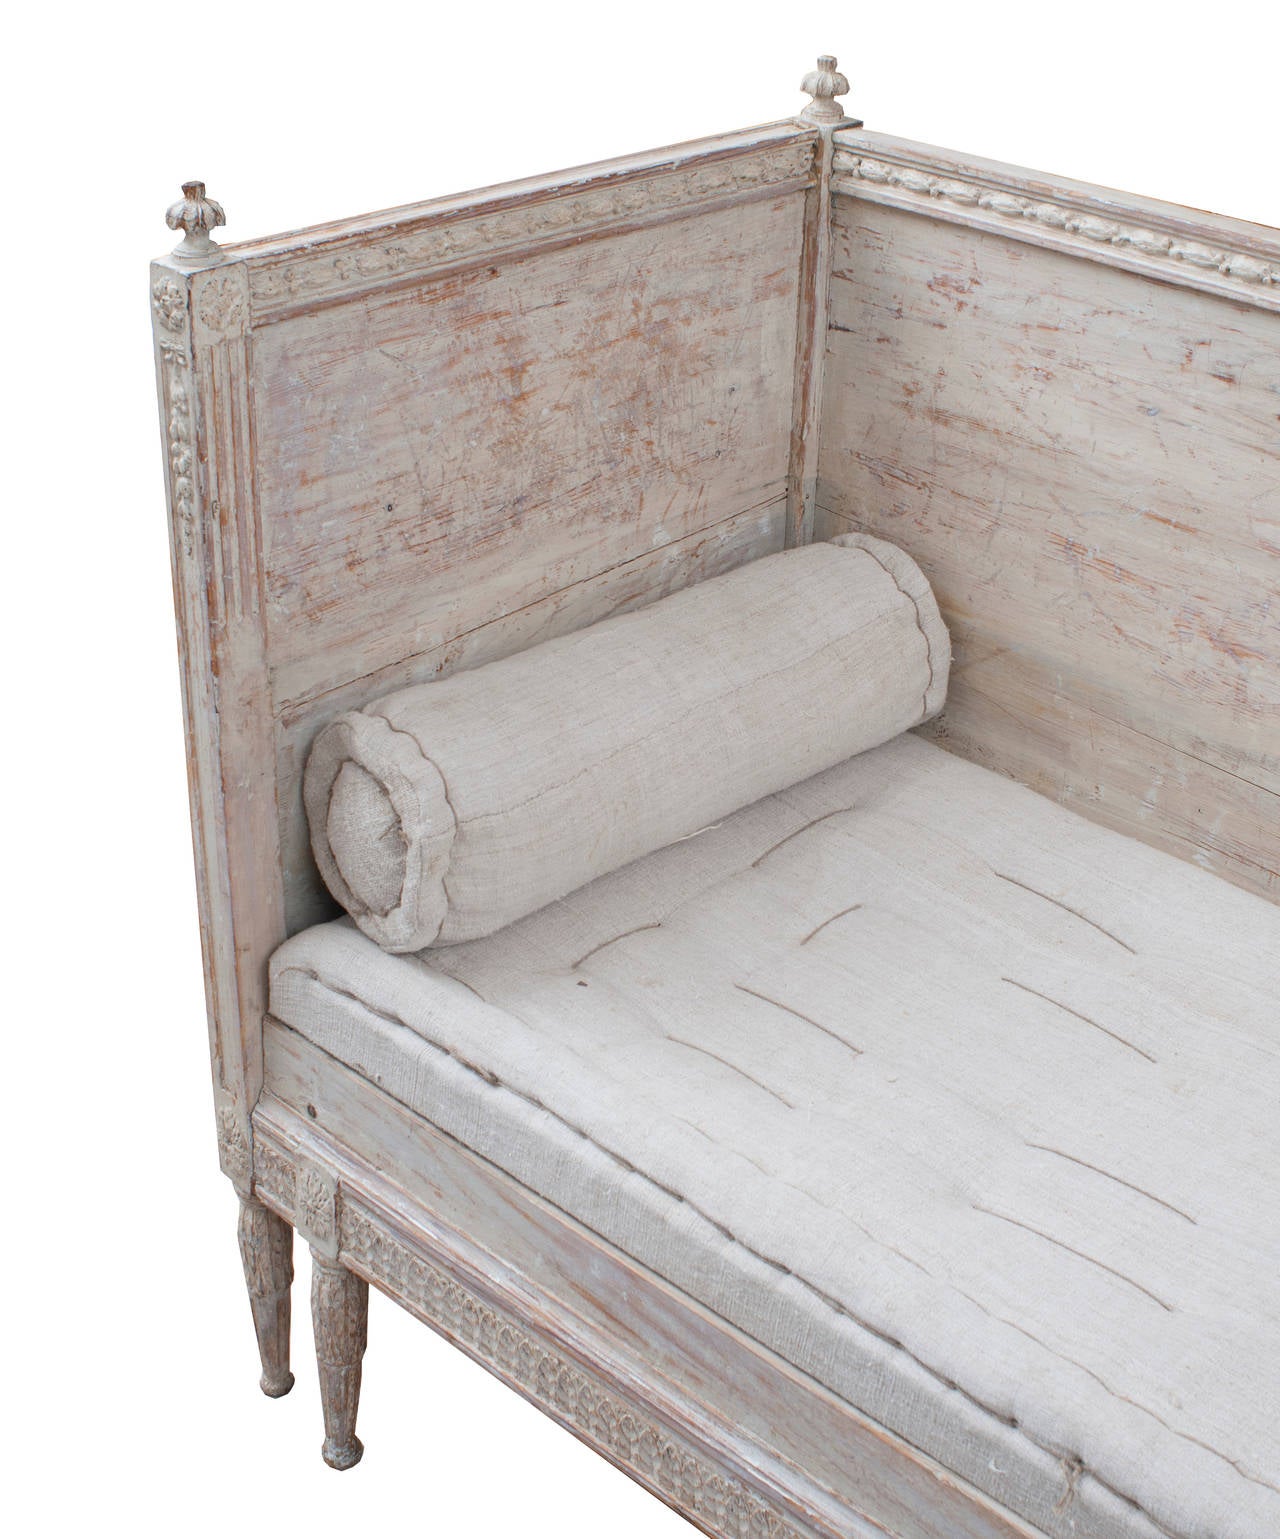 A Gustavian Bench with Beautiful Plaster Caryatid Decoration on the back and hand carved all around.